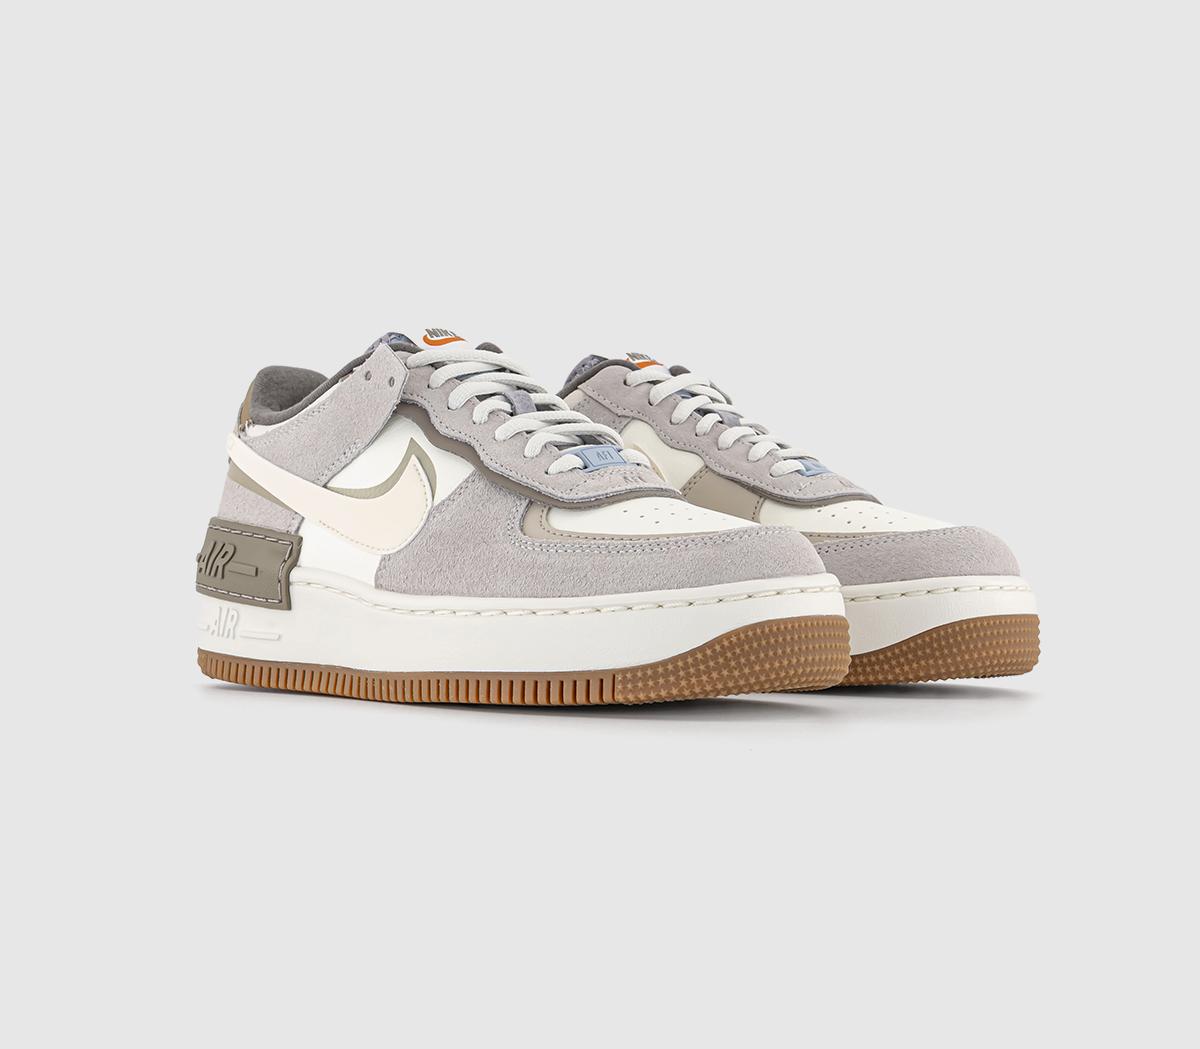 Nike Air Force 1 Shadow Trainers Sail Pale Ivory Grey Fog Provence Purple Cave White, 5.5